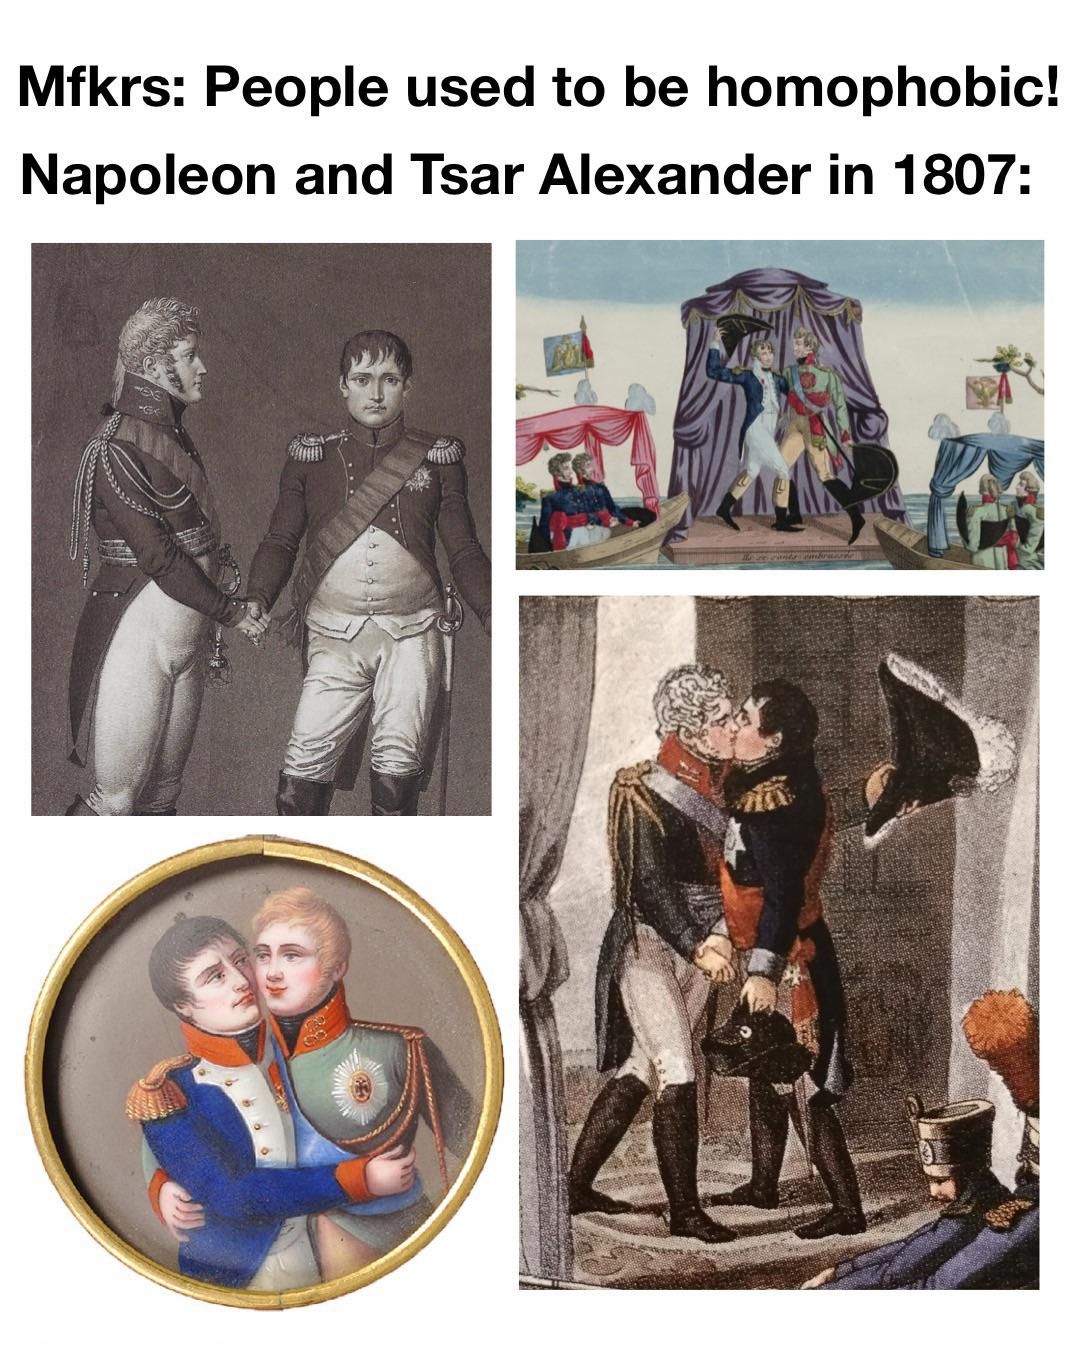 There are no paintings of Napoleon or the Tsar kissing their wives btw. Just each other.